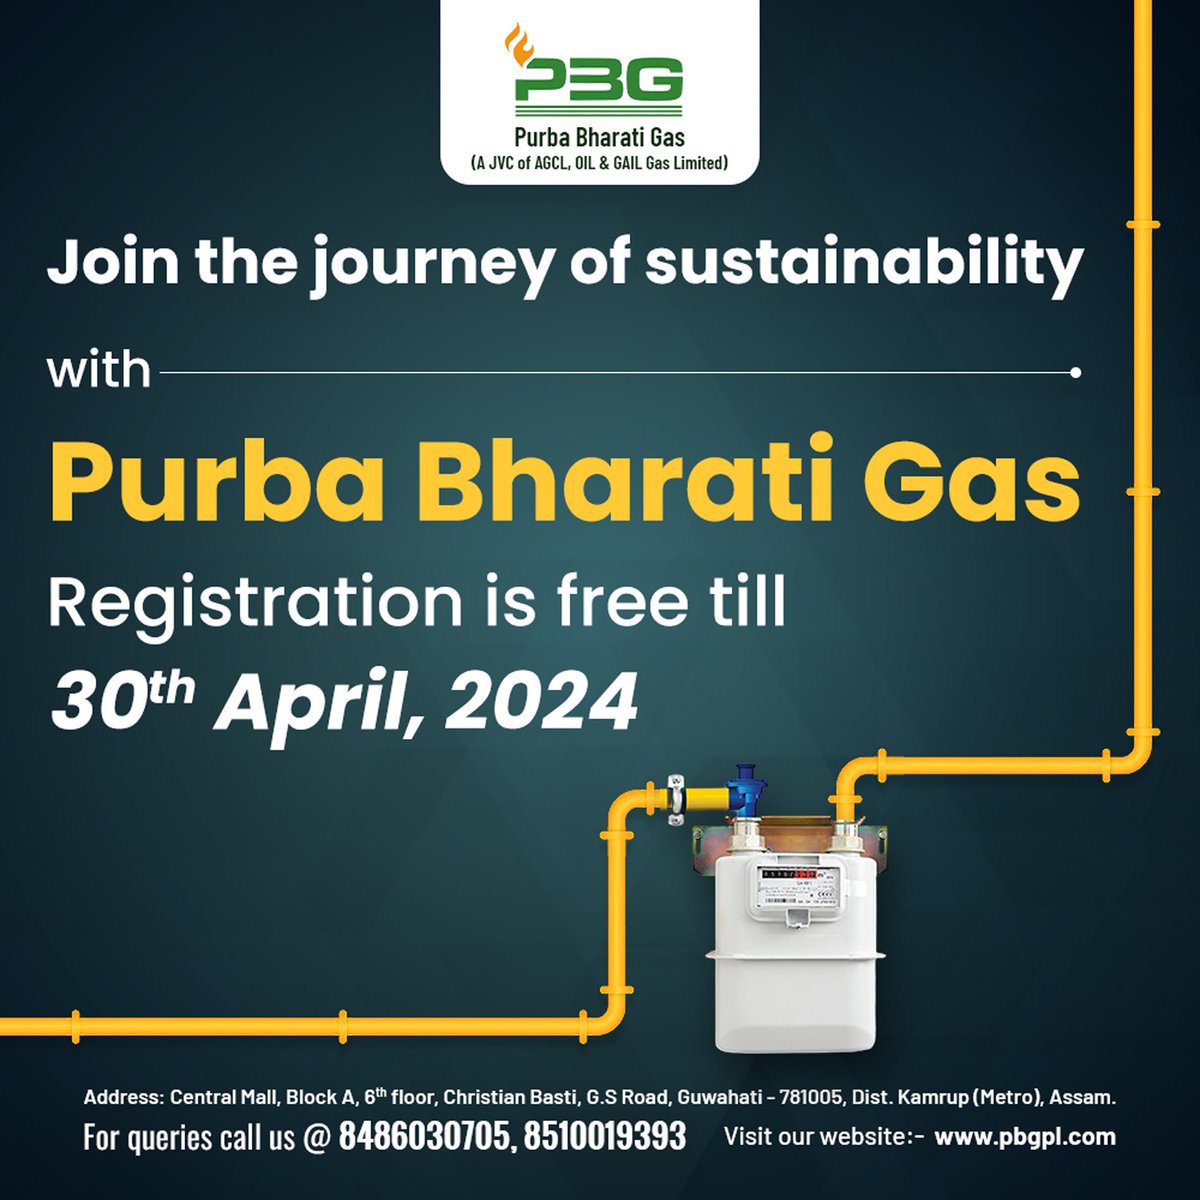 Free registration until April 30th, 2024. Let's start the journey towards sustainability together.
.
.
#pbgpl #FREEREGISTRATION #RegistrationOpen